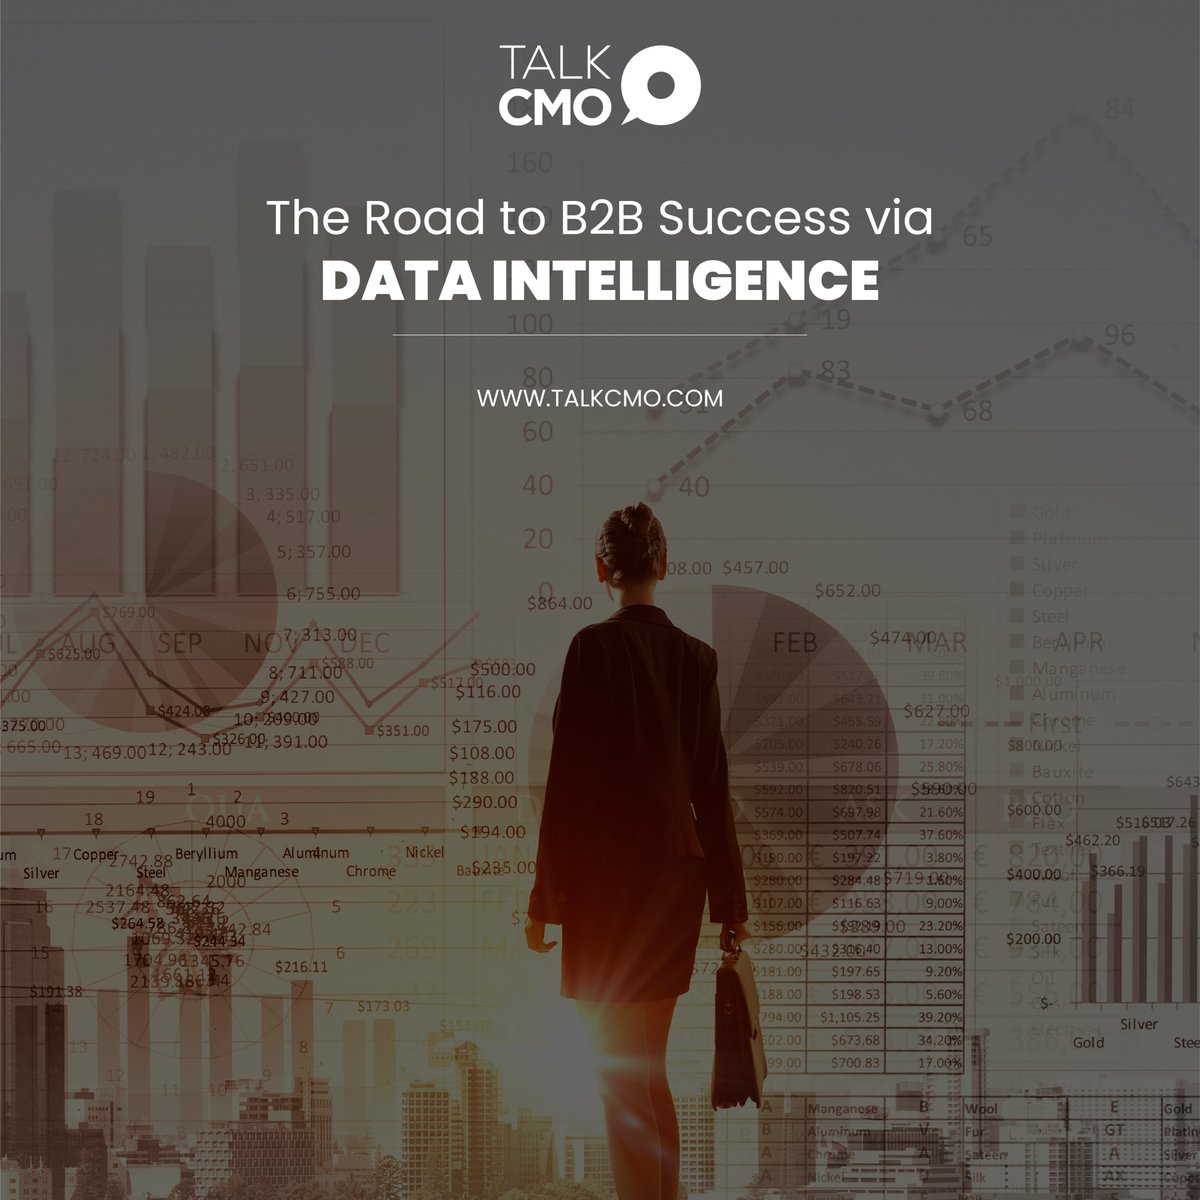 Data intelligence impacts the B2B landscape significantly. This section looks into its immense influence over B2B stakeholders and outlines how targeted insights empower decision-makers while rebuilding relationships in this constantly evolving ecosystem. tcmo.in/48NUgki